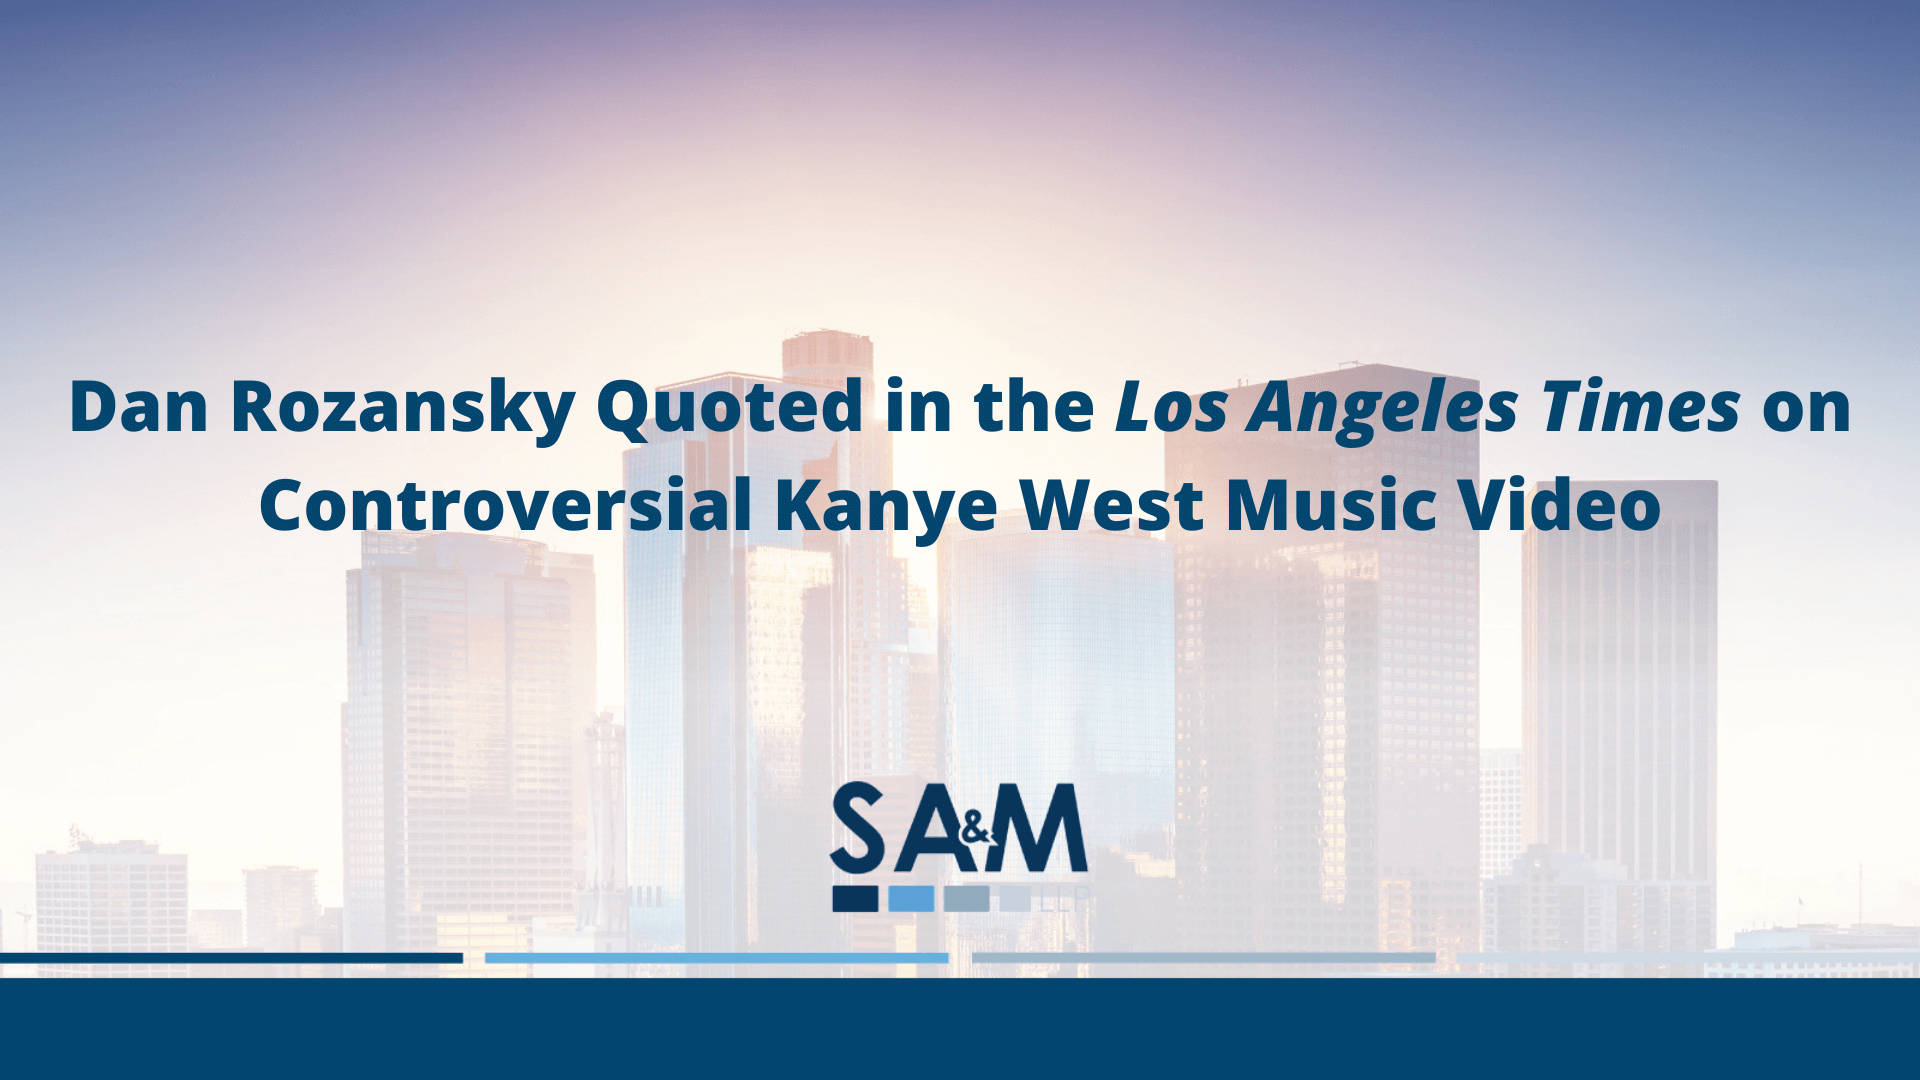 Dan Rozansky Quoted in the Los Angeles Times on Controversial Kanye West Music Video